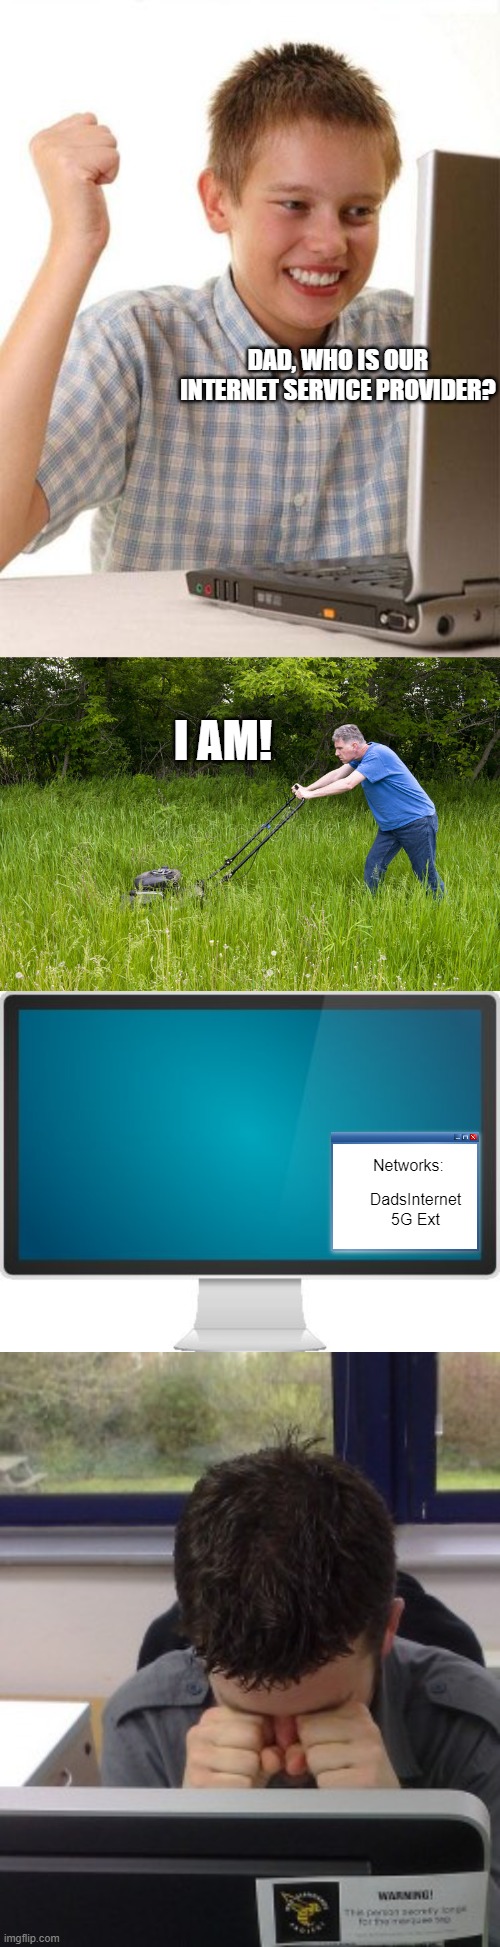 DAD, WHO IS OUR INTERNET SERVICE PROVIDER? I AM! Networks:; DadsInternet 5G Ext | image tagged in memes,first day on the internet kid,mowing tall grass,computer screen,sad computer guy | made w/ Imgflip meme maker